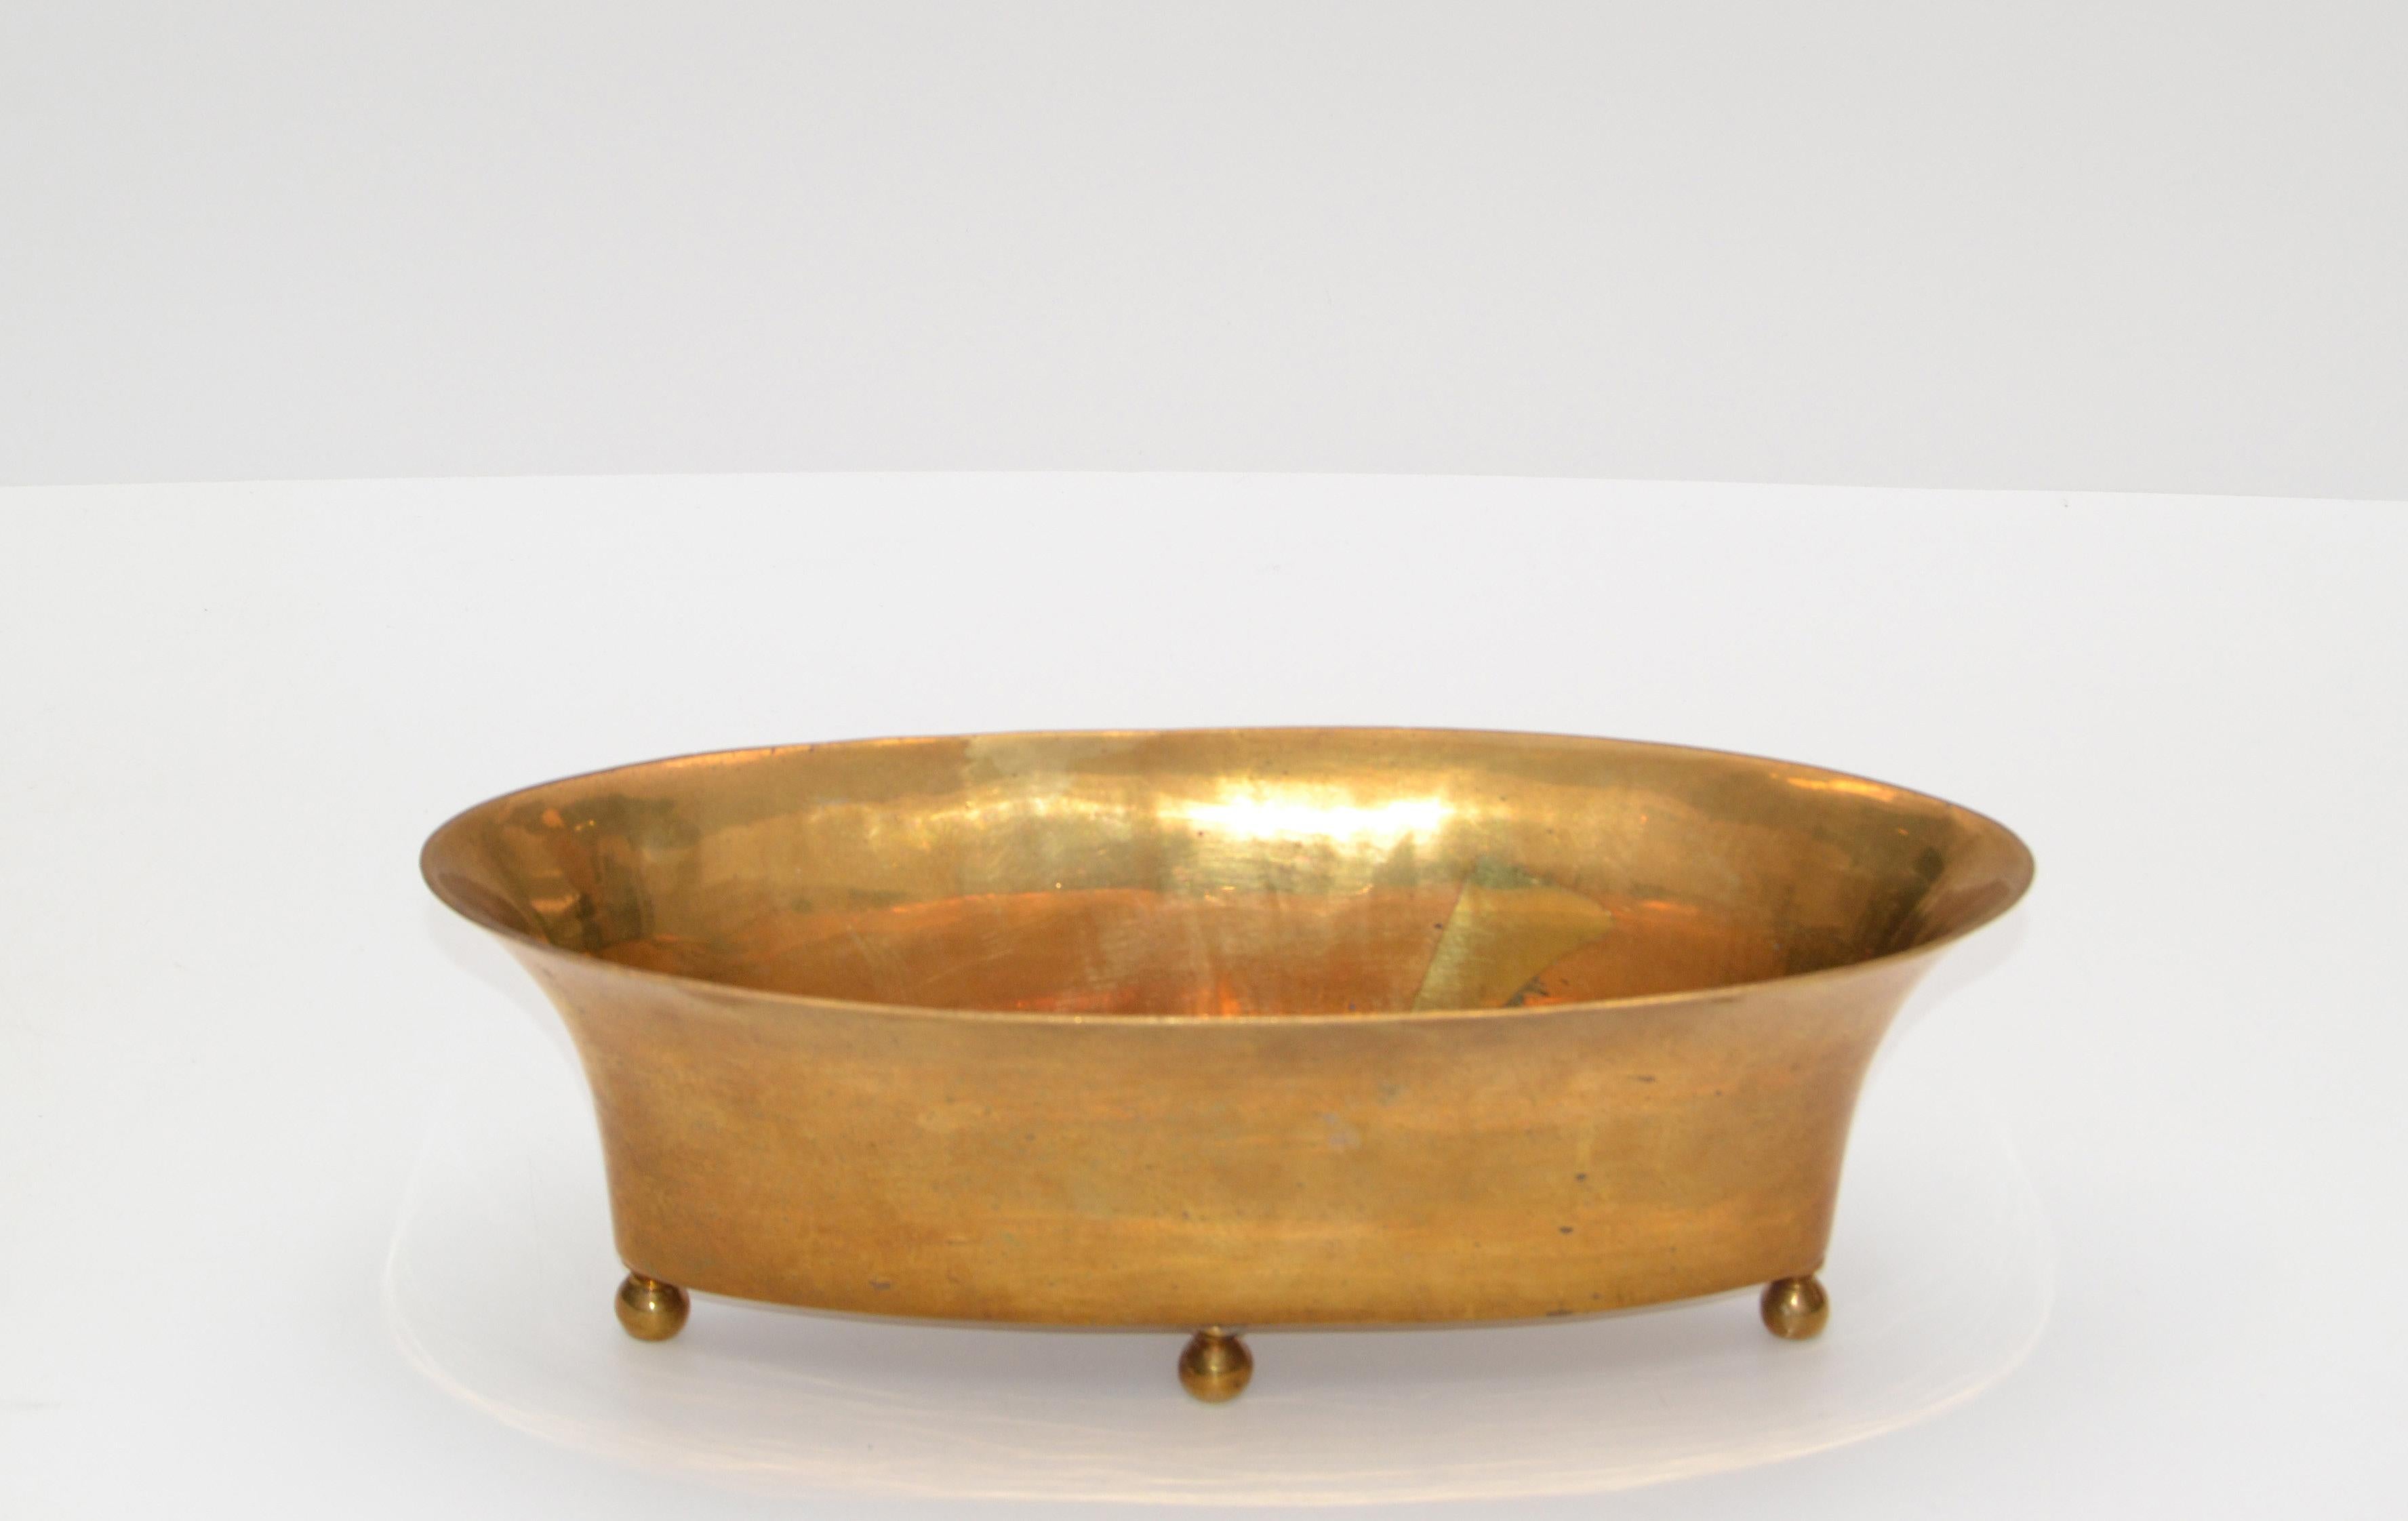 Mid-Century Modern oval shaped footed bowl in brass.
Great for your coffee table display or as a centerpiece.